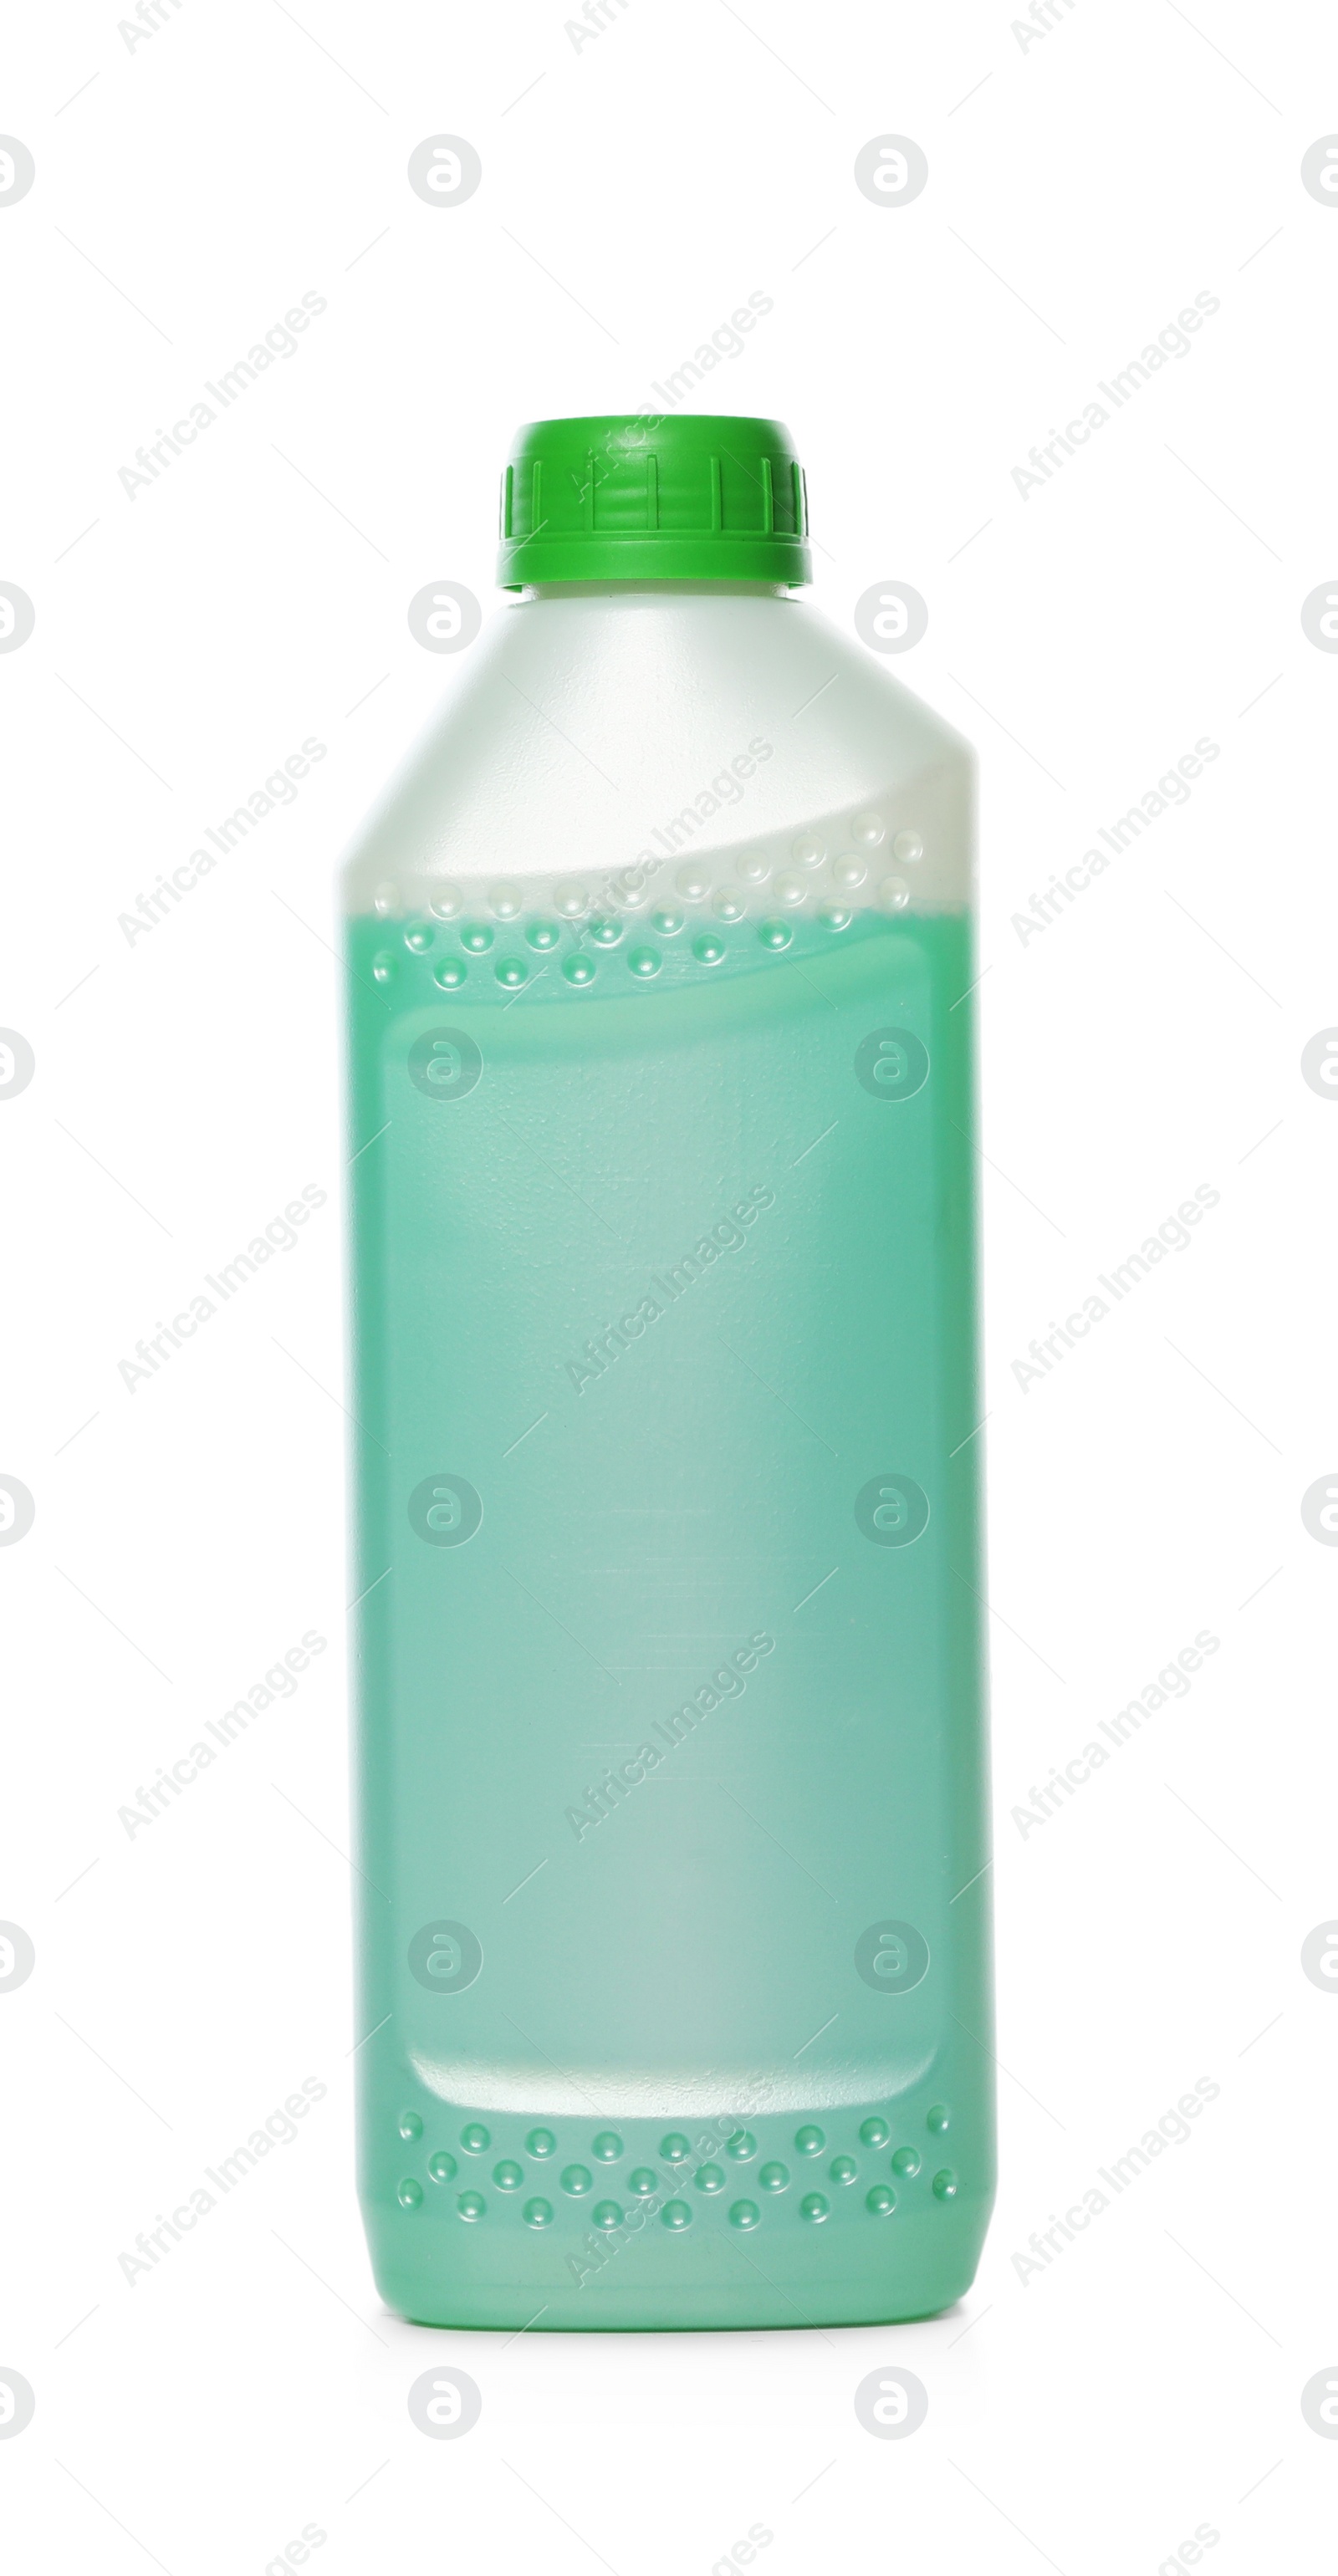 Photo of Antifreeze in plastic bottle isolated on white